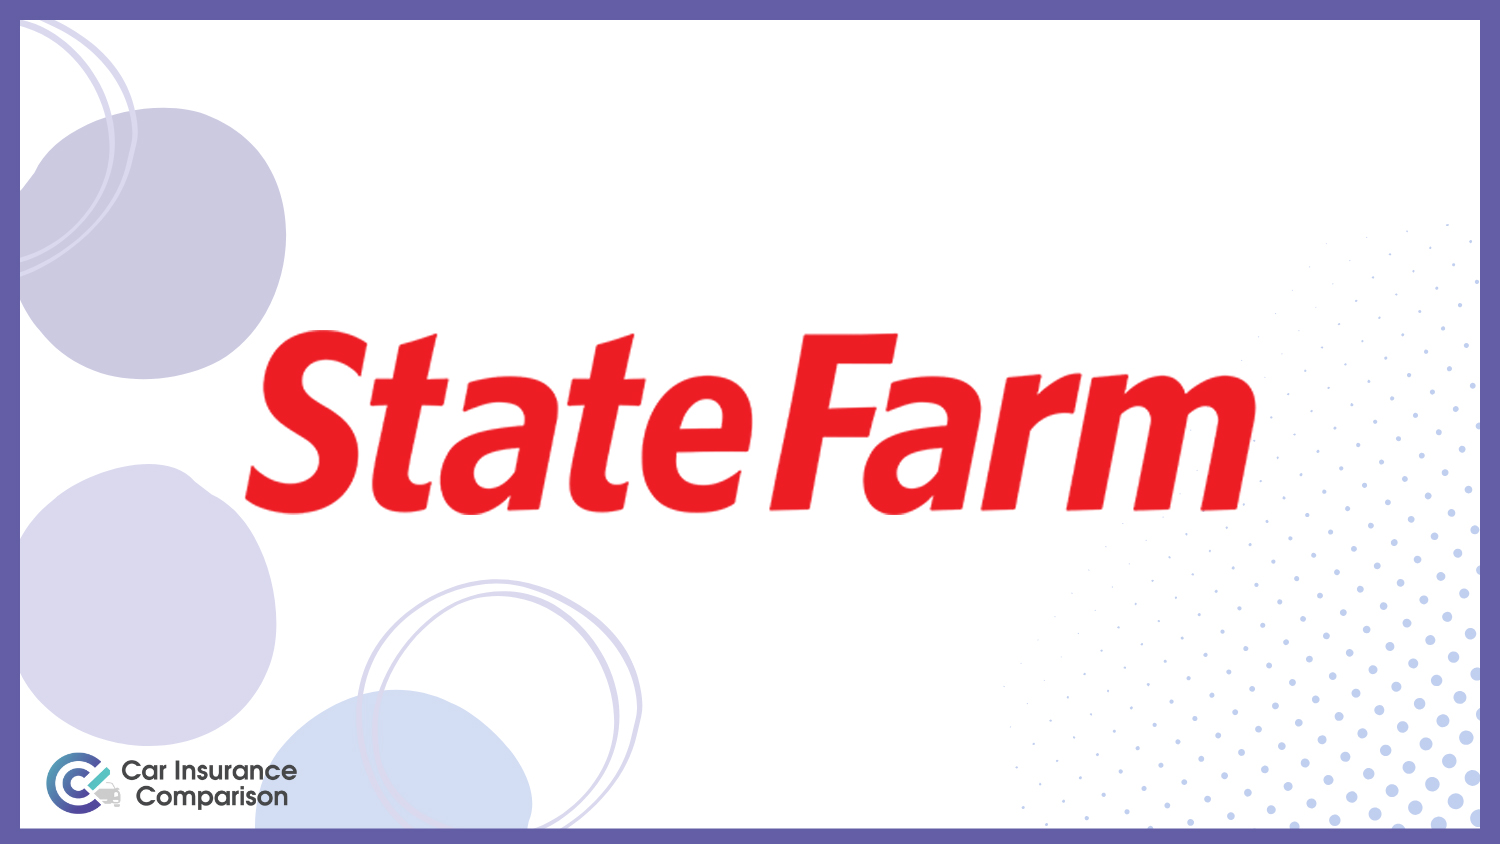 State Farm: Best Car Insurance for Emergency Service Workers